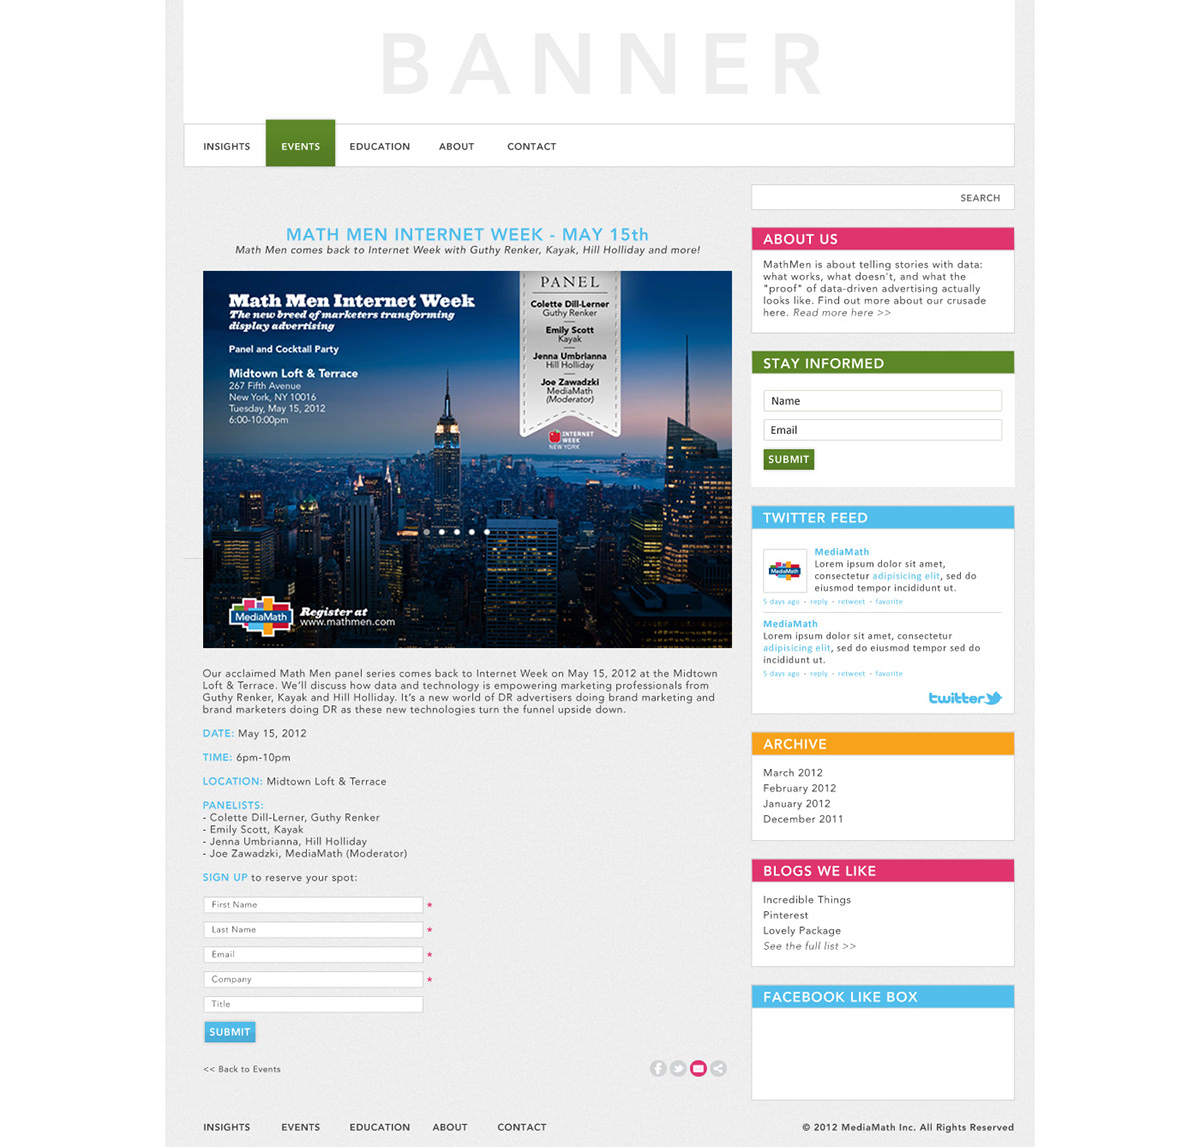 new marketing   institute digital media  web Website design  banner CEO about Events contact